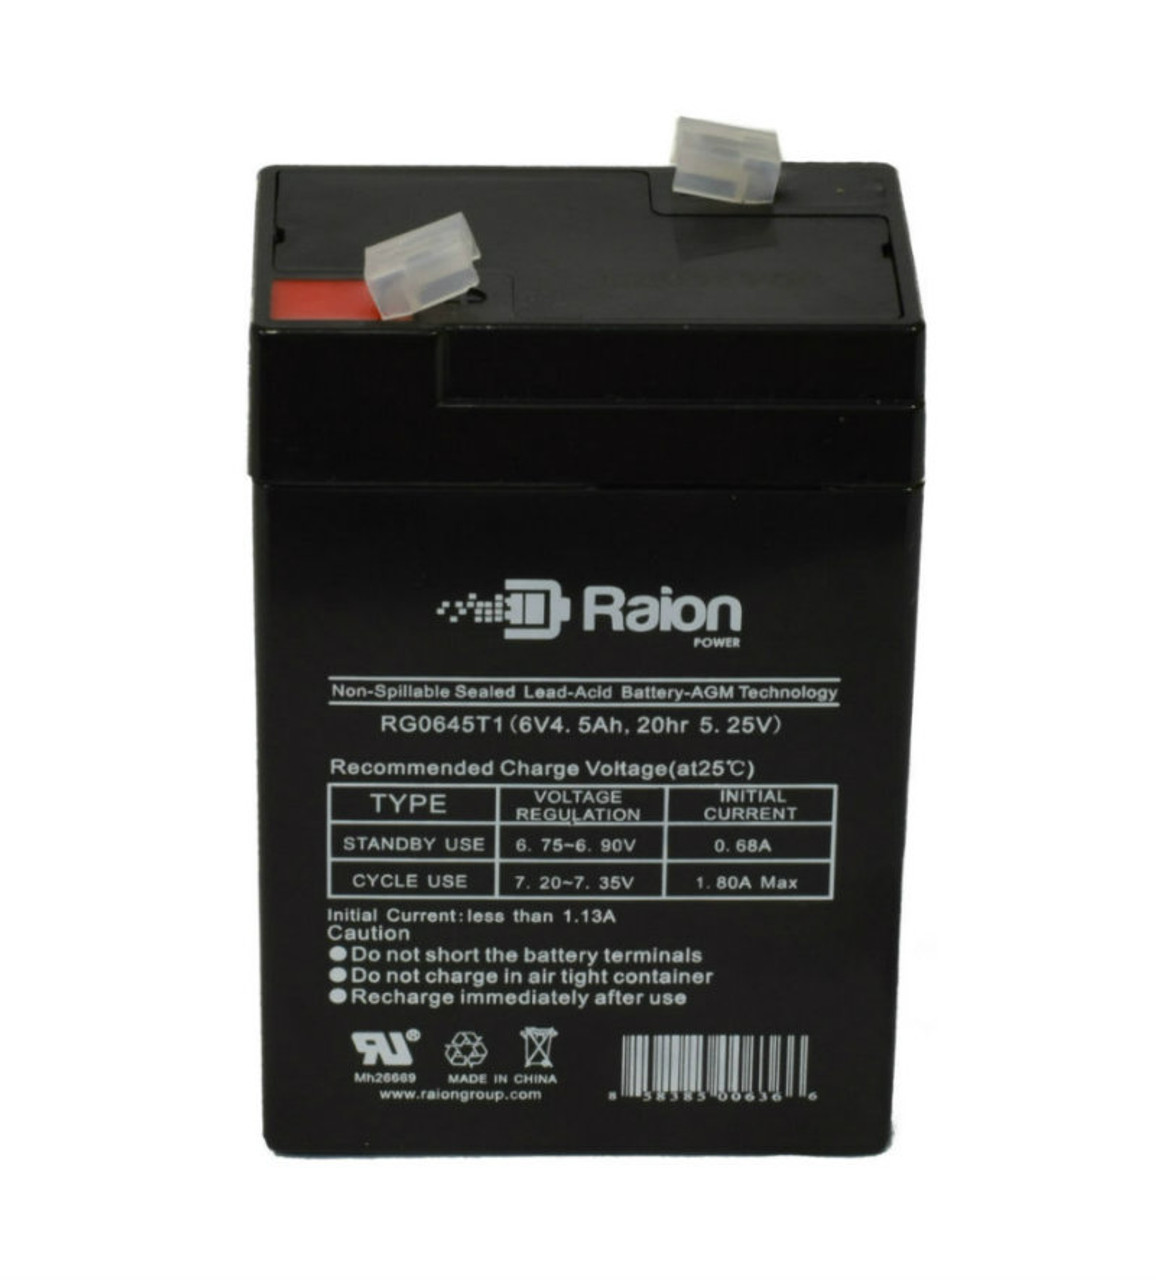 Raion Power RG0645T1 Replacement Battery Cartridge for ROBITON VRLA6-4.5